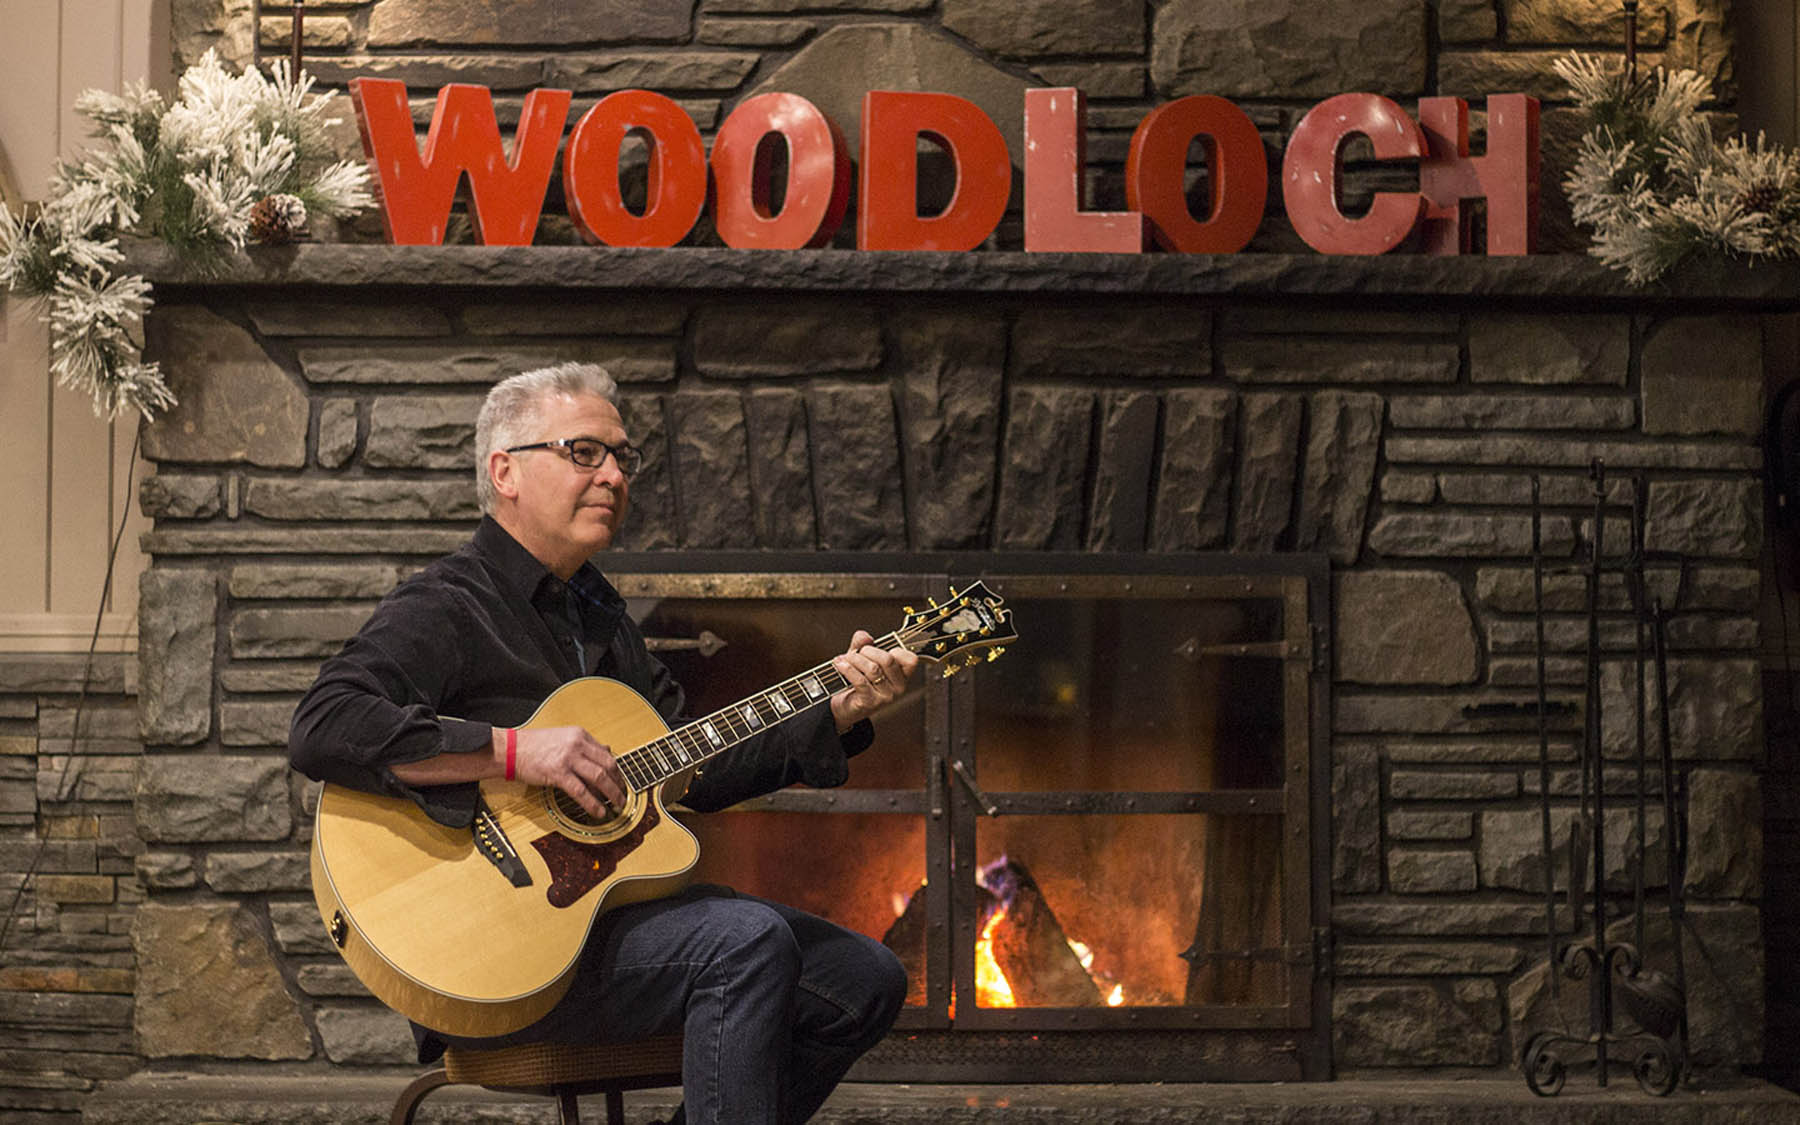 Acoustic guitarist next to a fireplace.